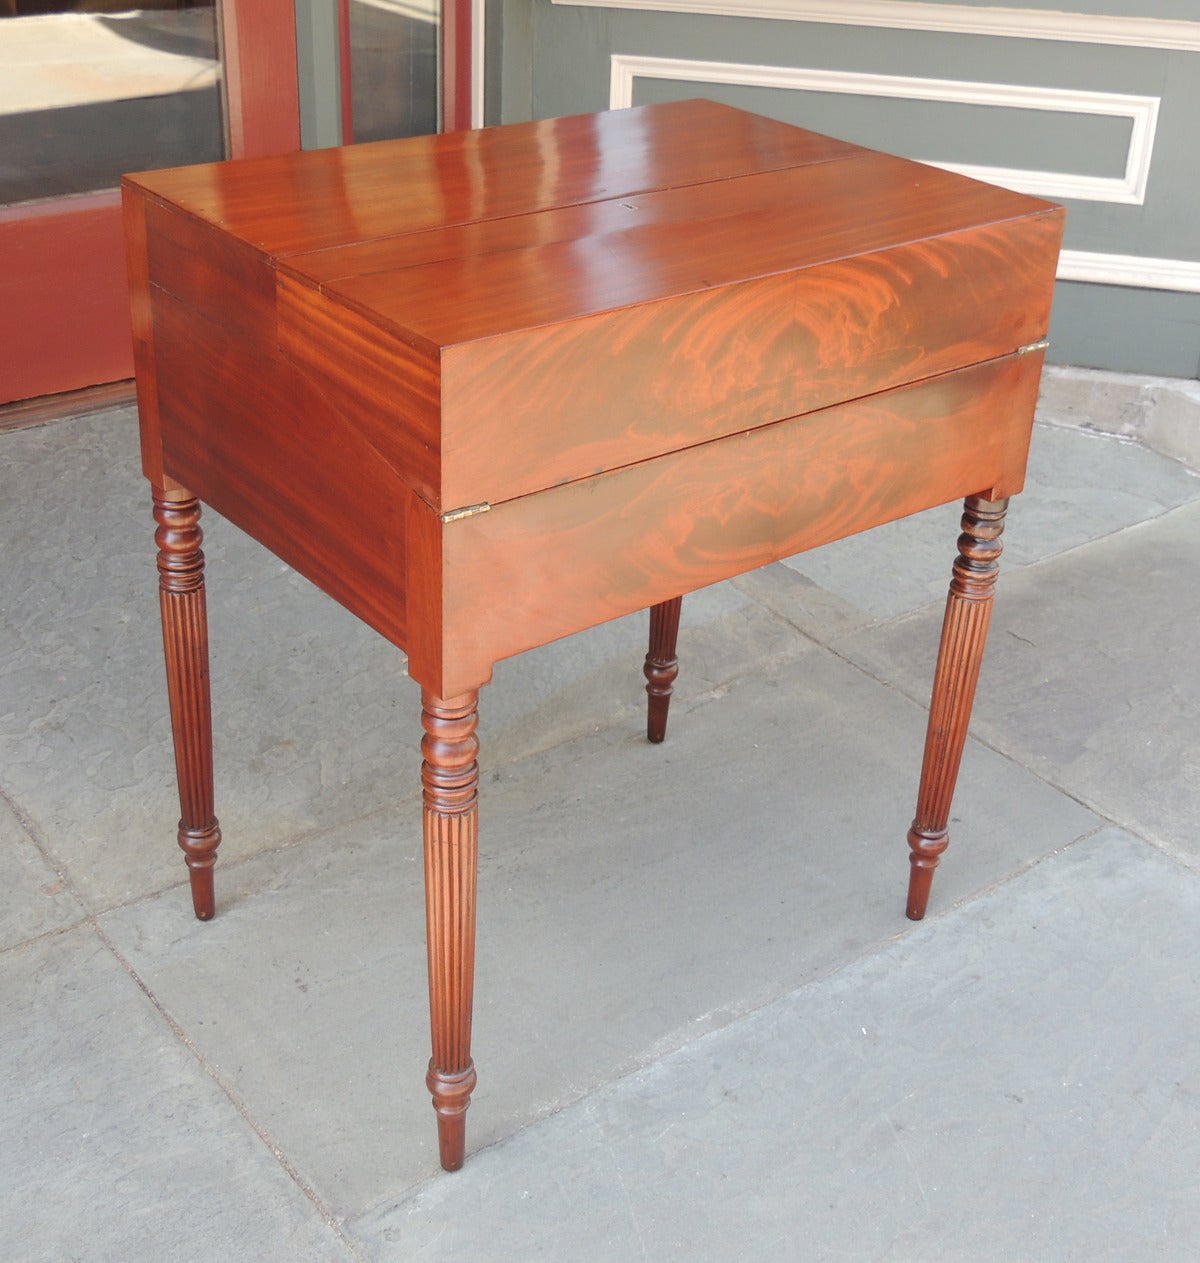 This Campaign desk was made in Virginia in the 1780s. It is made of mahogany with white oak and poplar secondary woods. This desk has a hinge top that unfolds into a desk and two panels on the writing surface that lift to reveal more storage. The